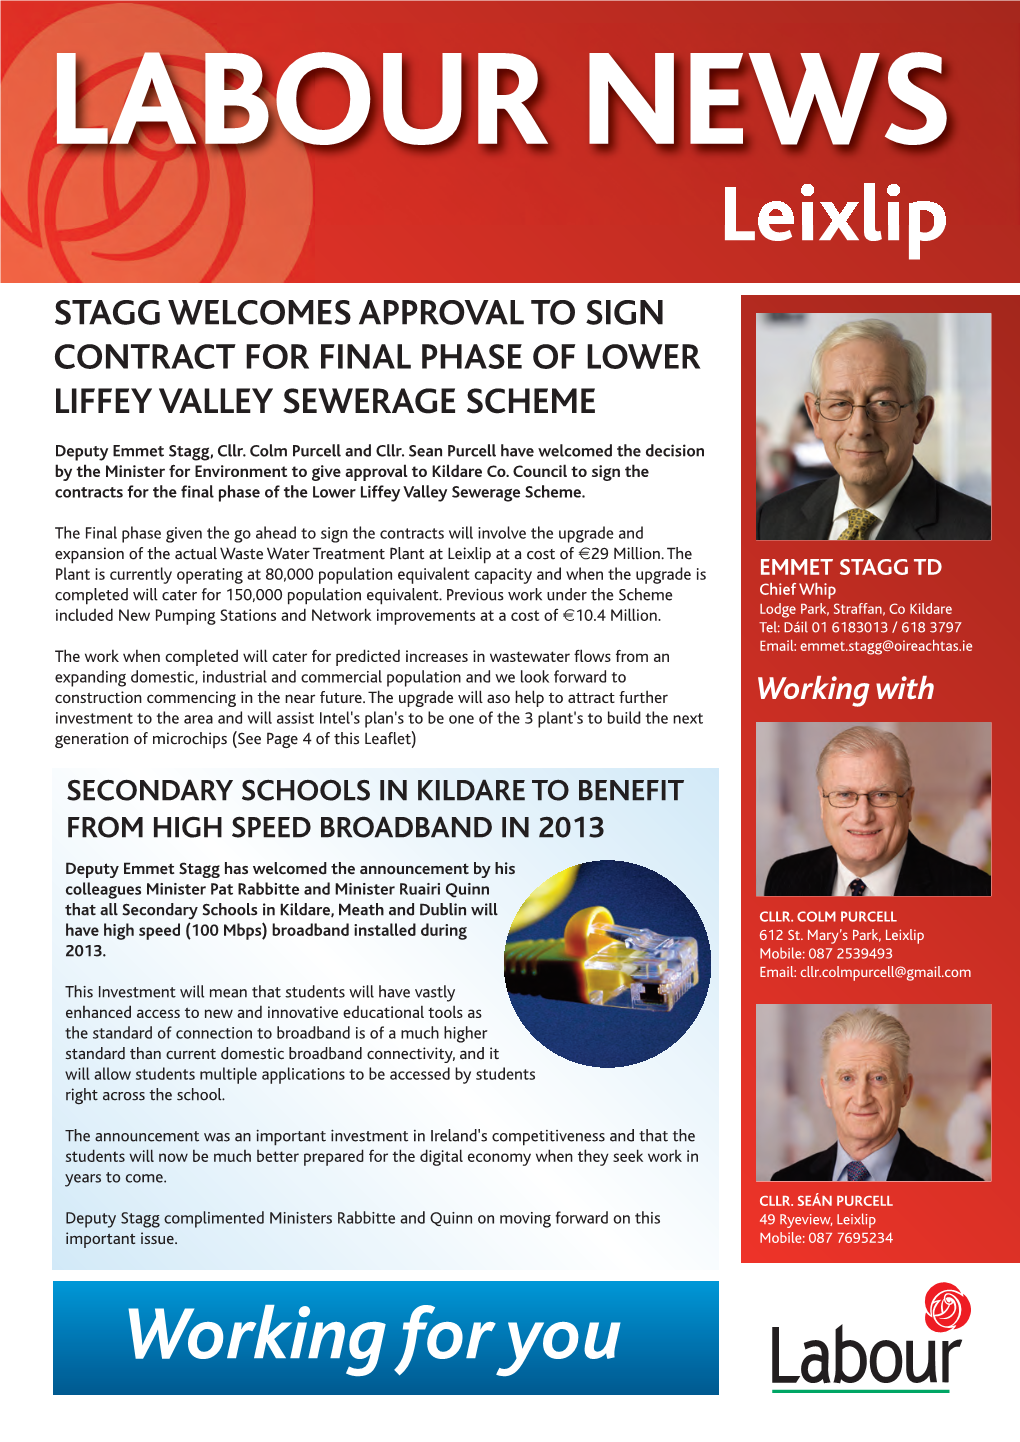 Leixlip STAGG WELCOMES APPROVAL to SIGN CONTRACT for FINAL PHASE of LOWER LIFFEY VALLEY SEWERAGE SCHEME